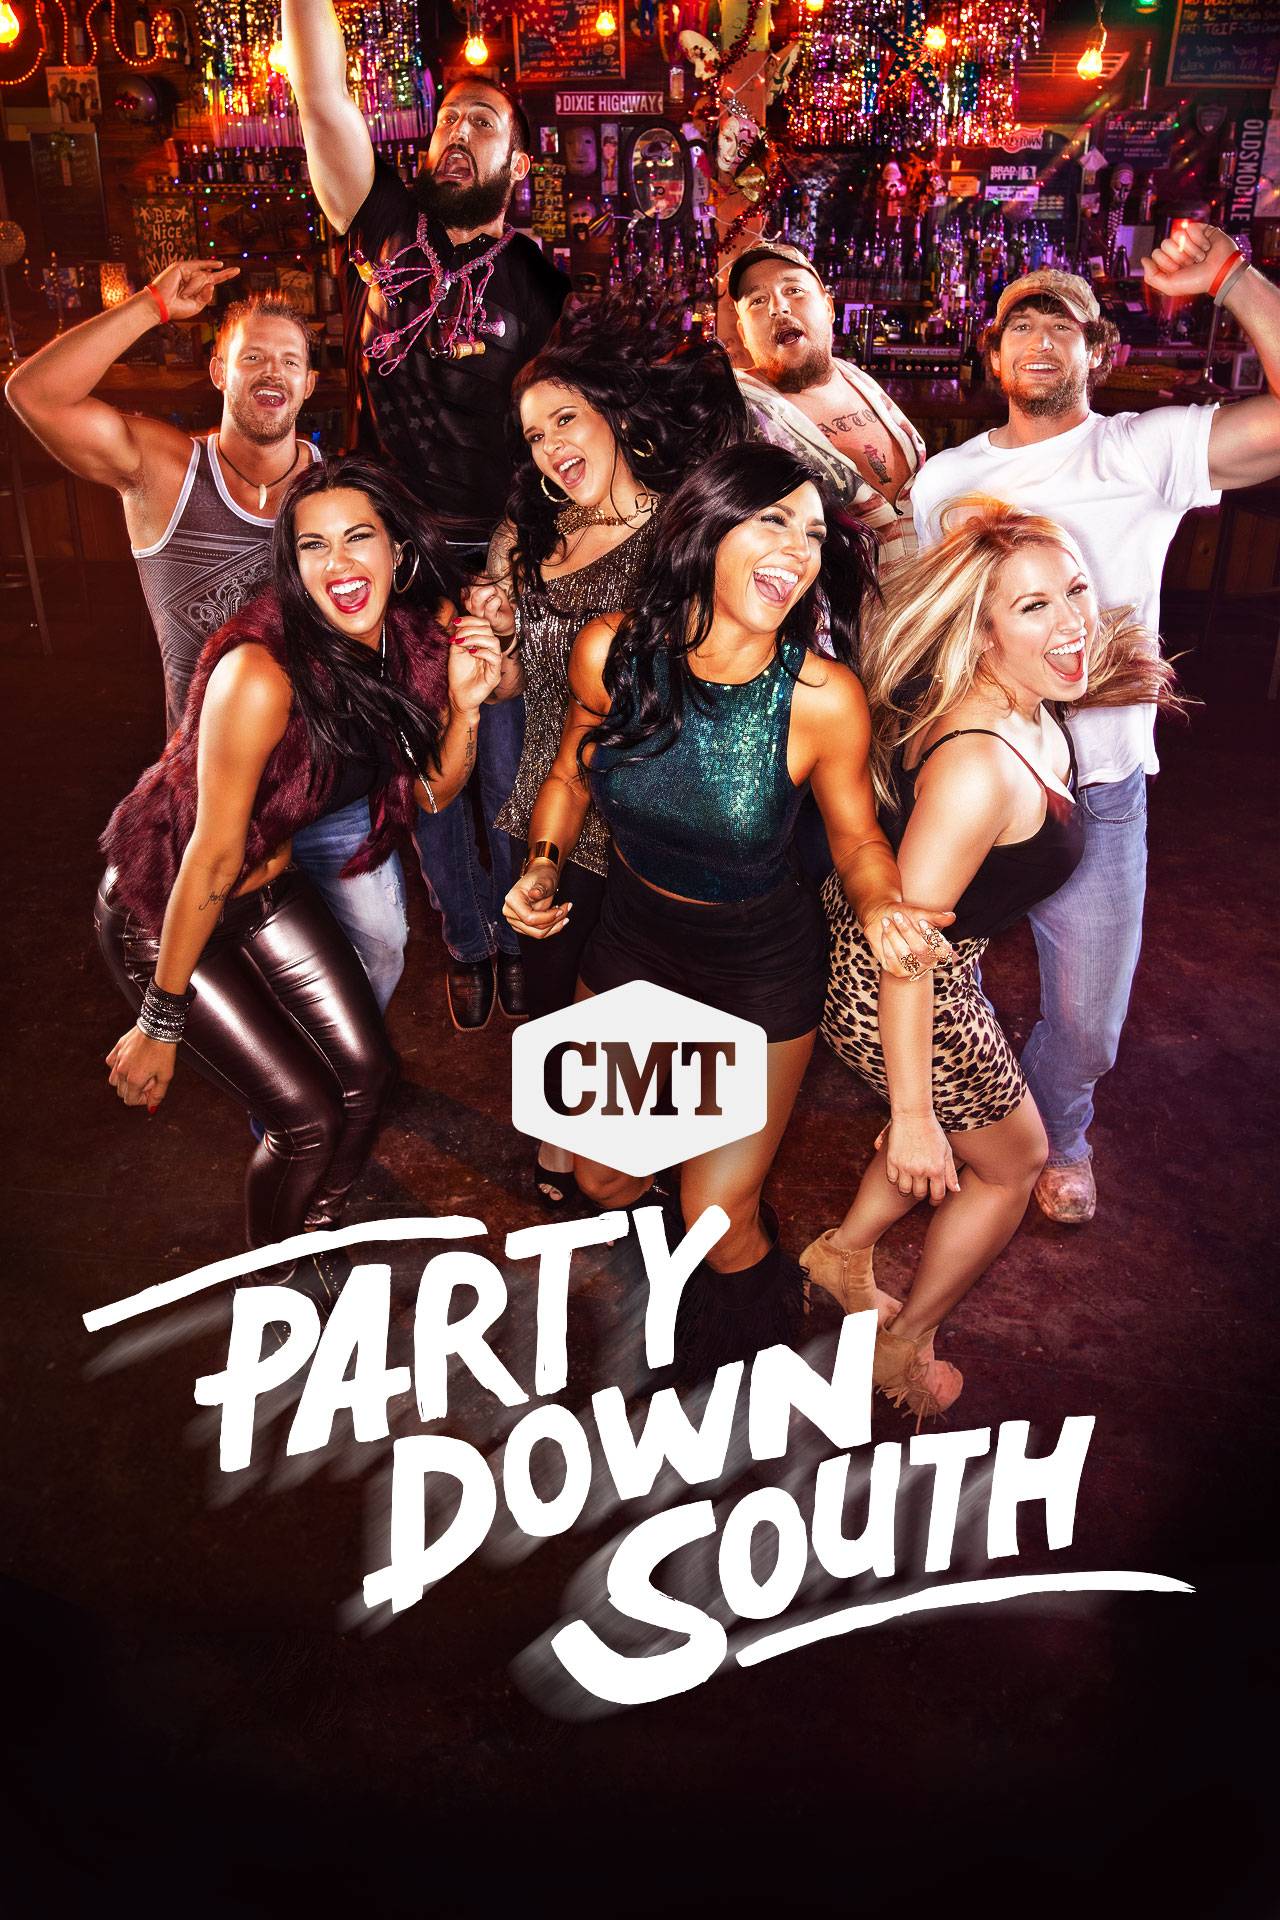 party down south cast members cmt